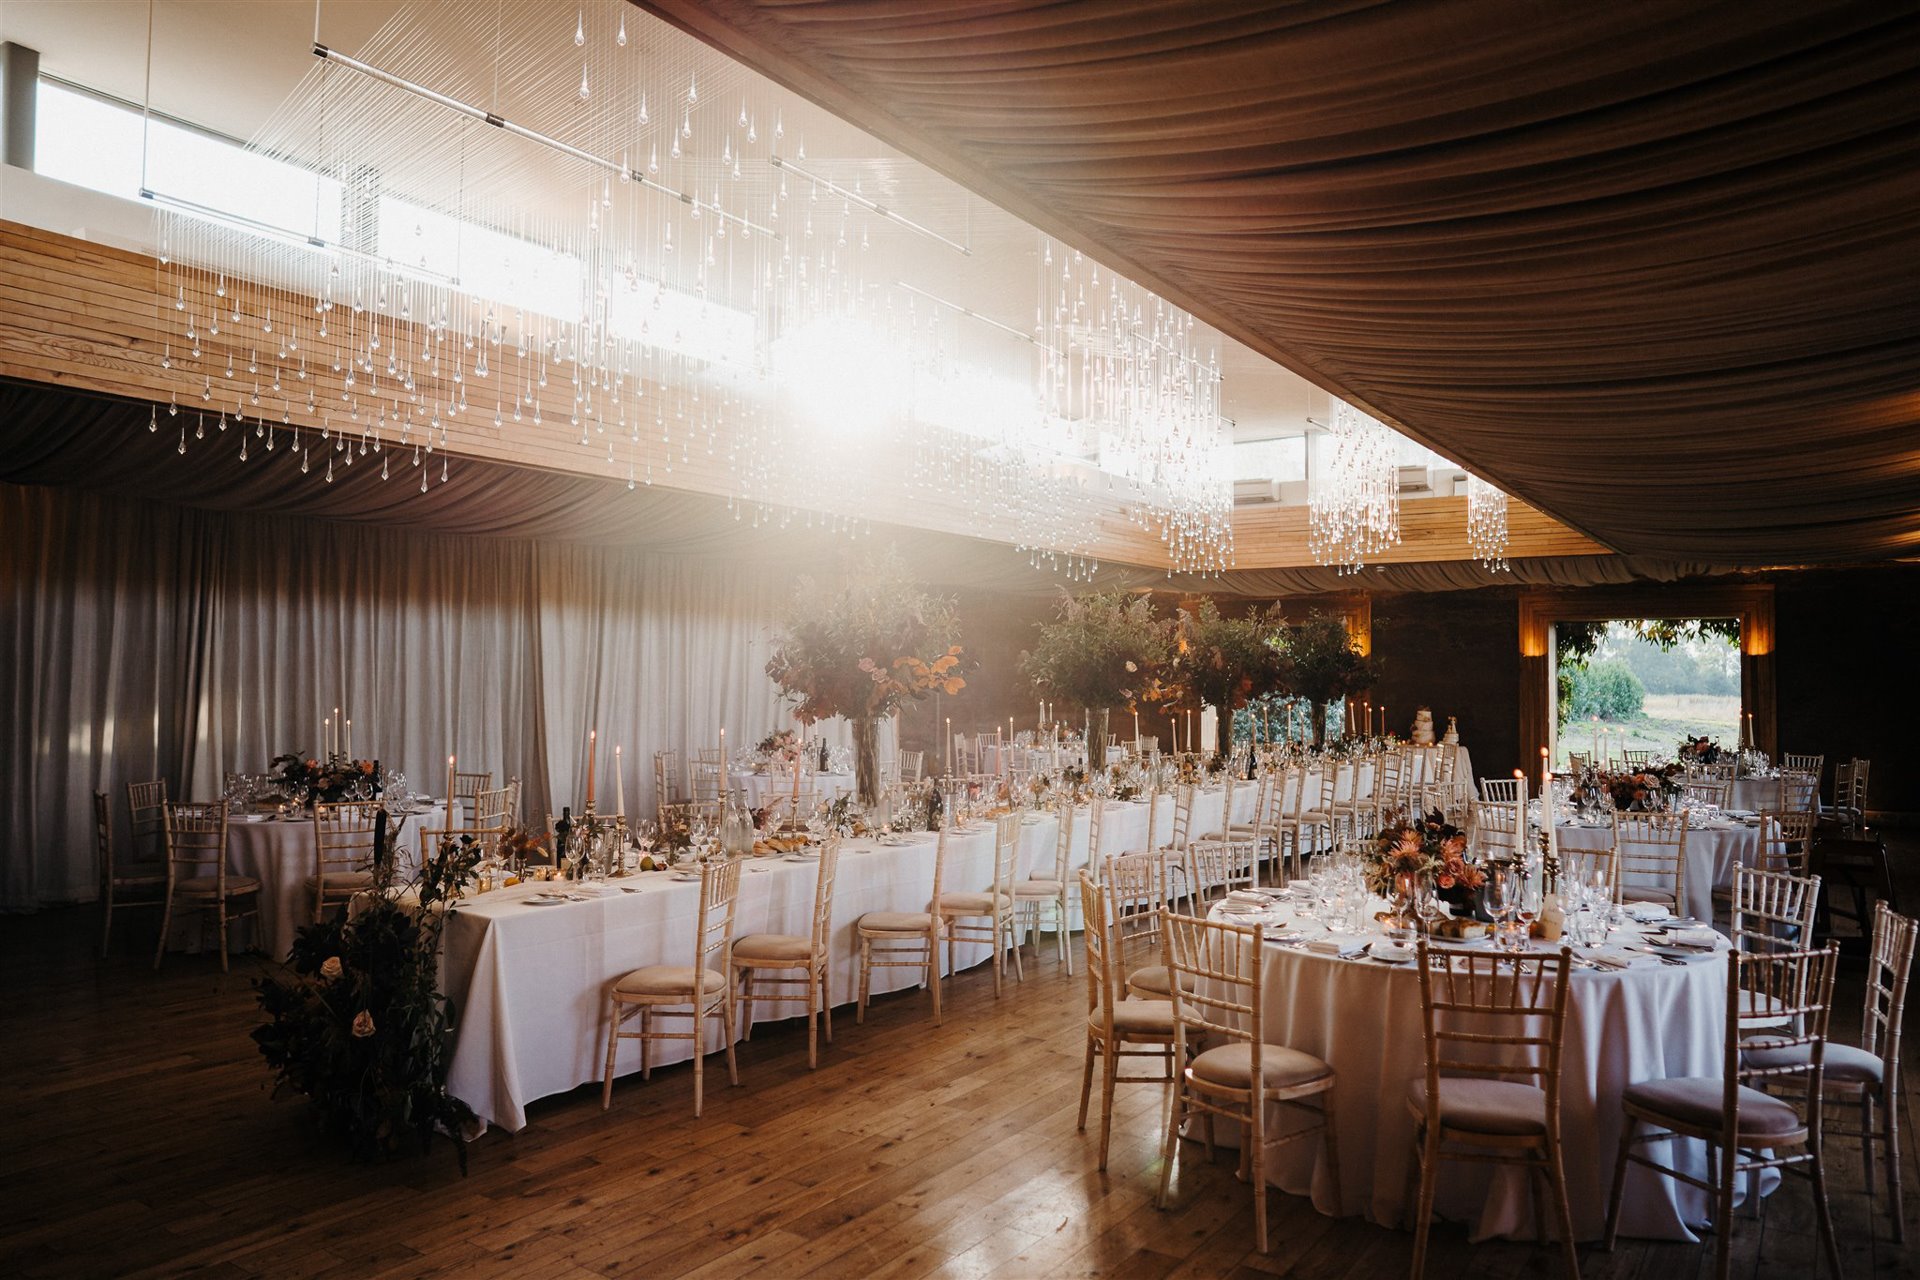 An Autumnal wedding with a touch of Hollywood Glamour